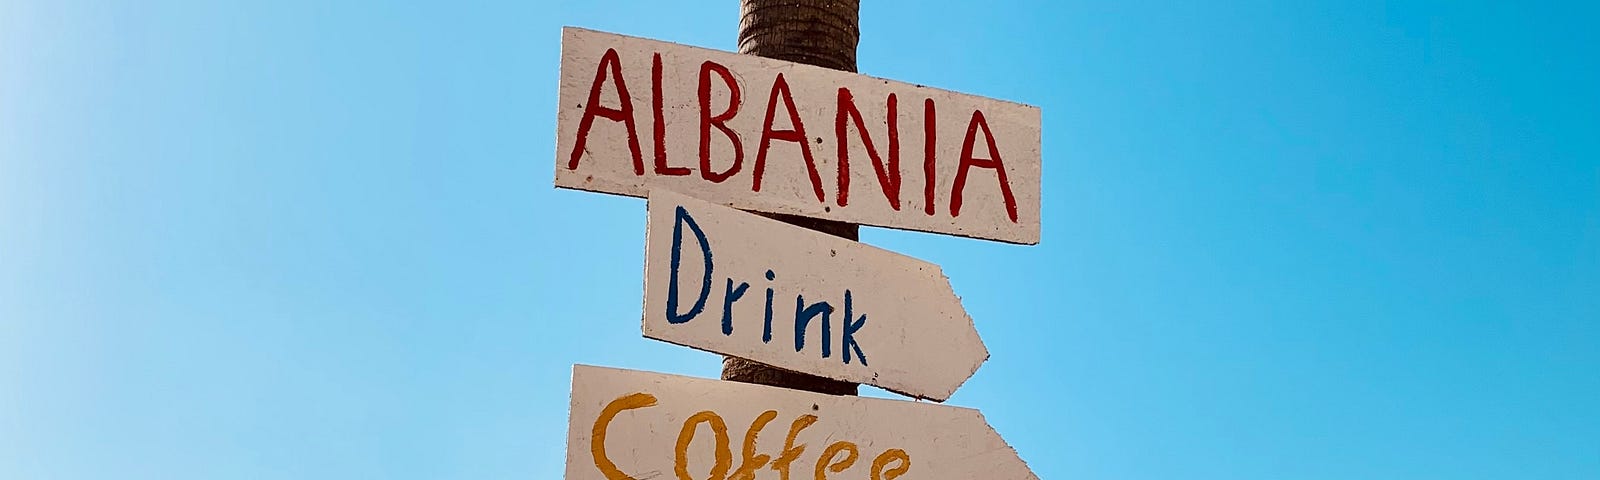 A hand written welcome sign on a beach pole in Albania showing where to get food and drinks.